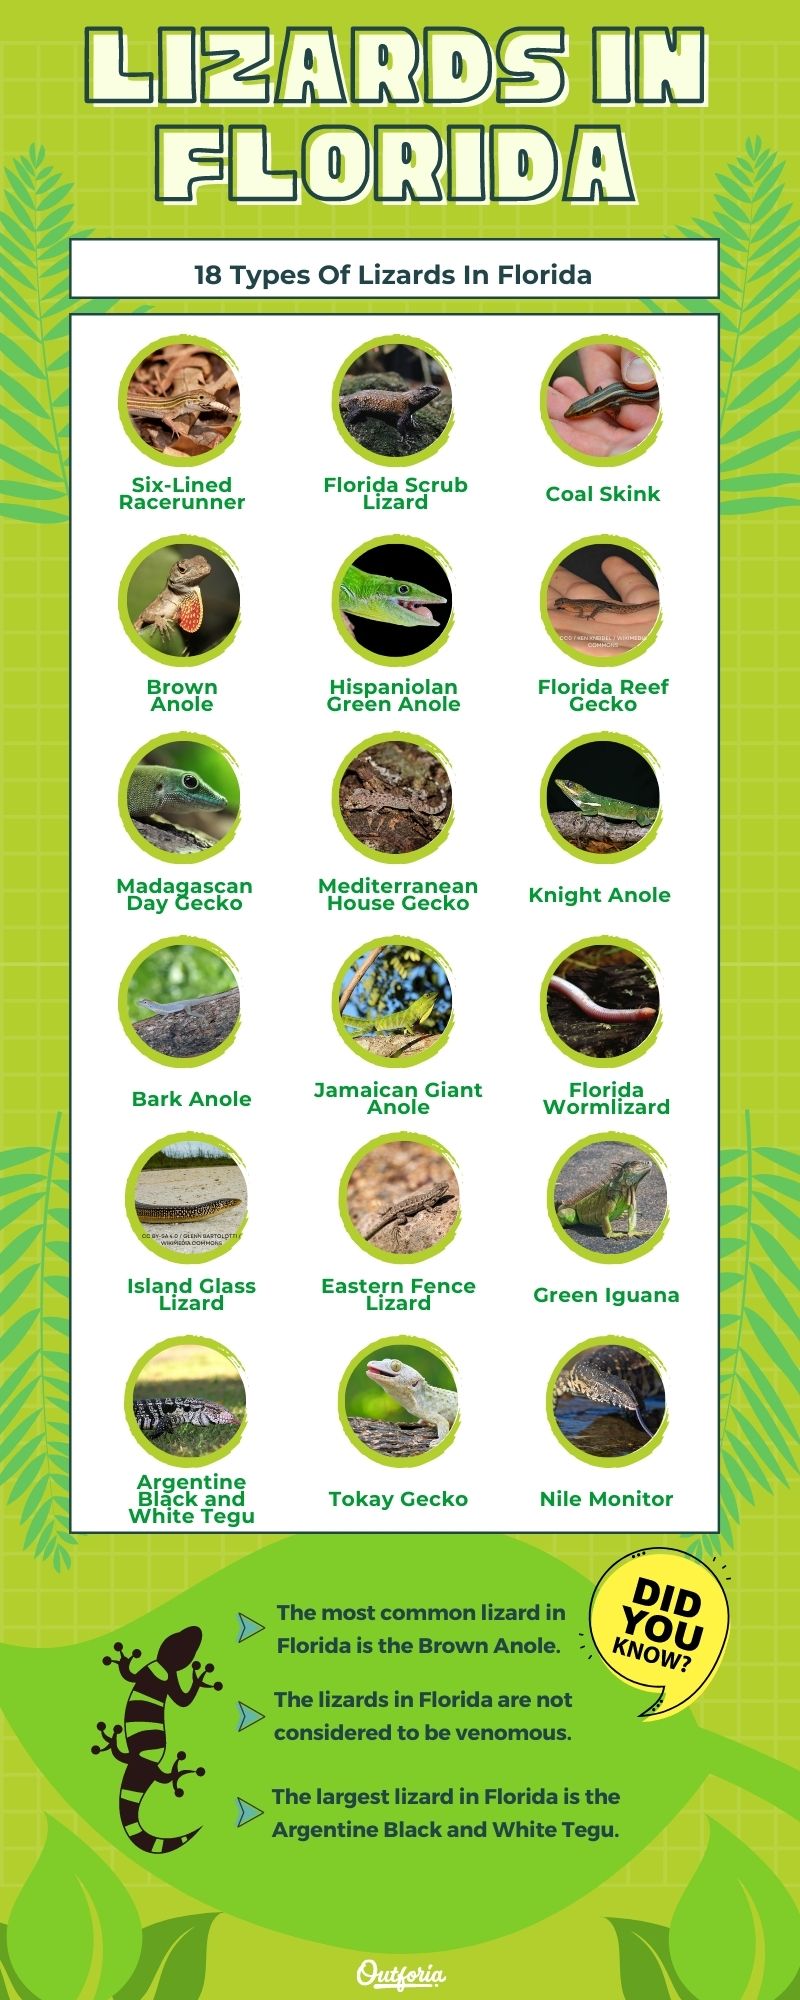 Chart of Lizards in Florida with photos and facts